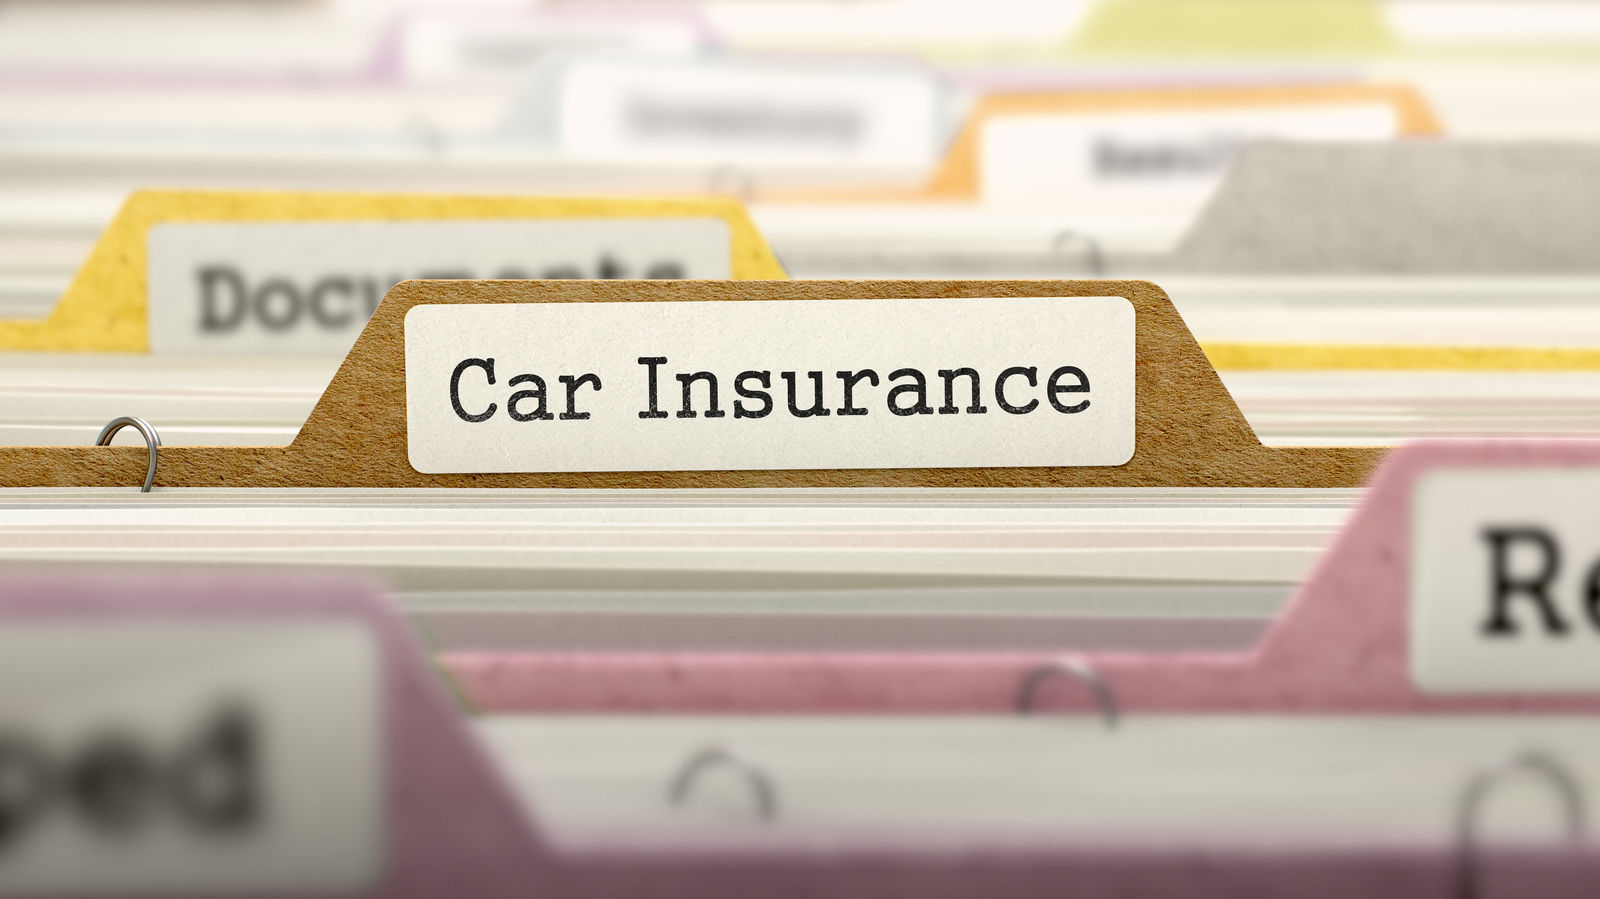 Can car insurance be suspended?